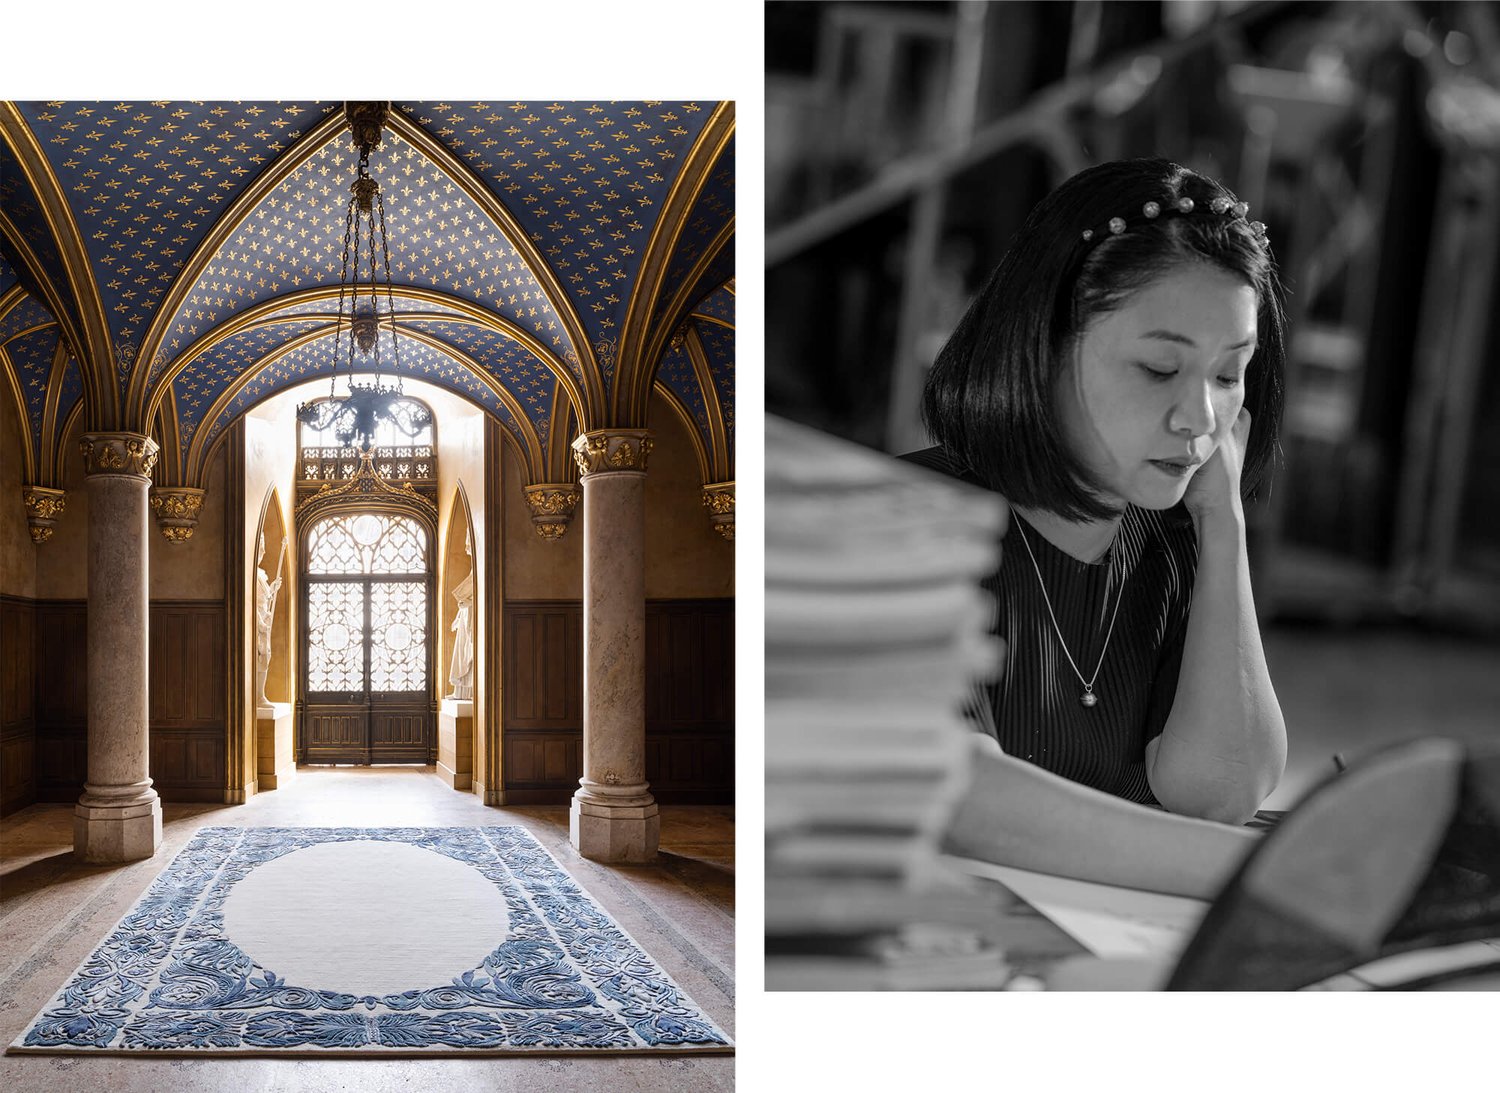 Two images: On left is an arched ceiling room with textured area rug. On right is a woman concentrating on her work.